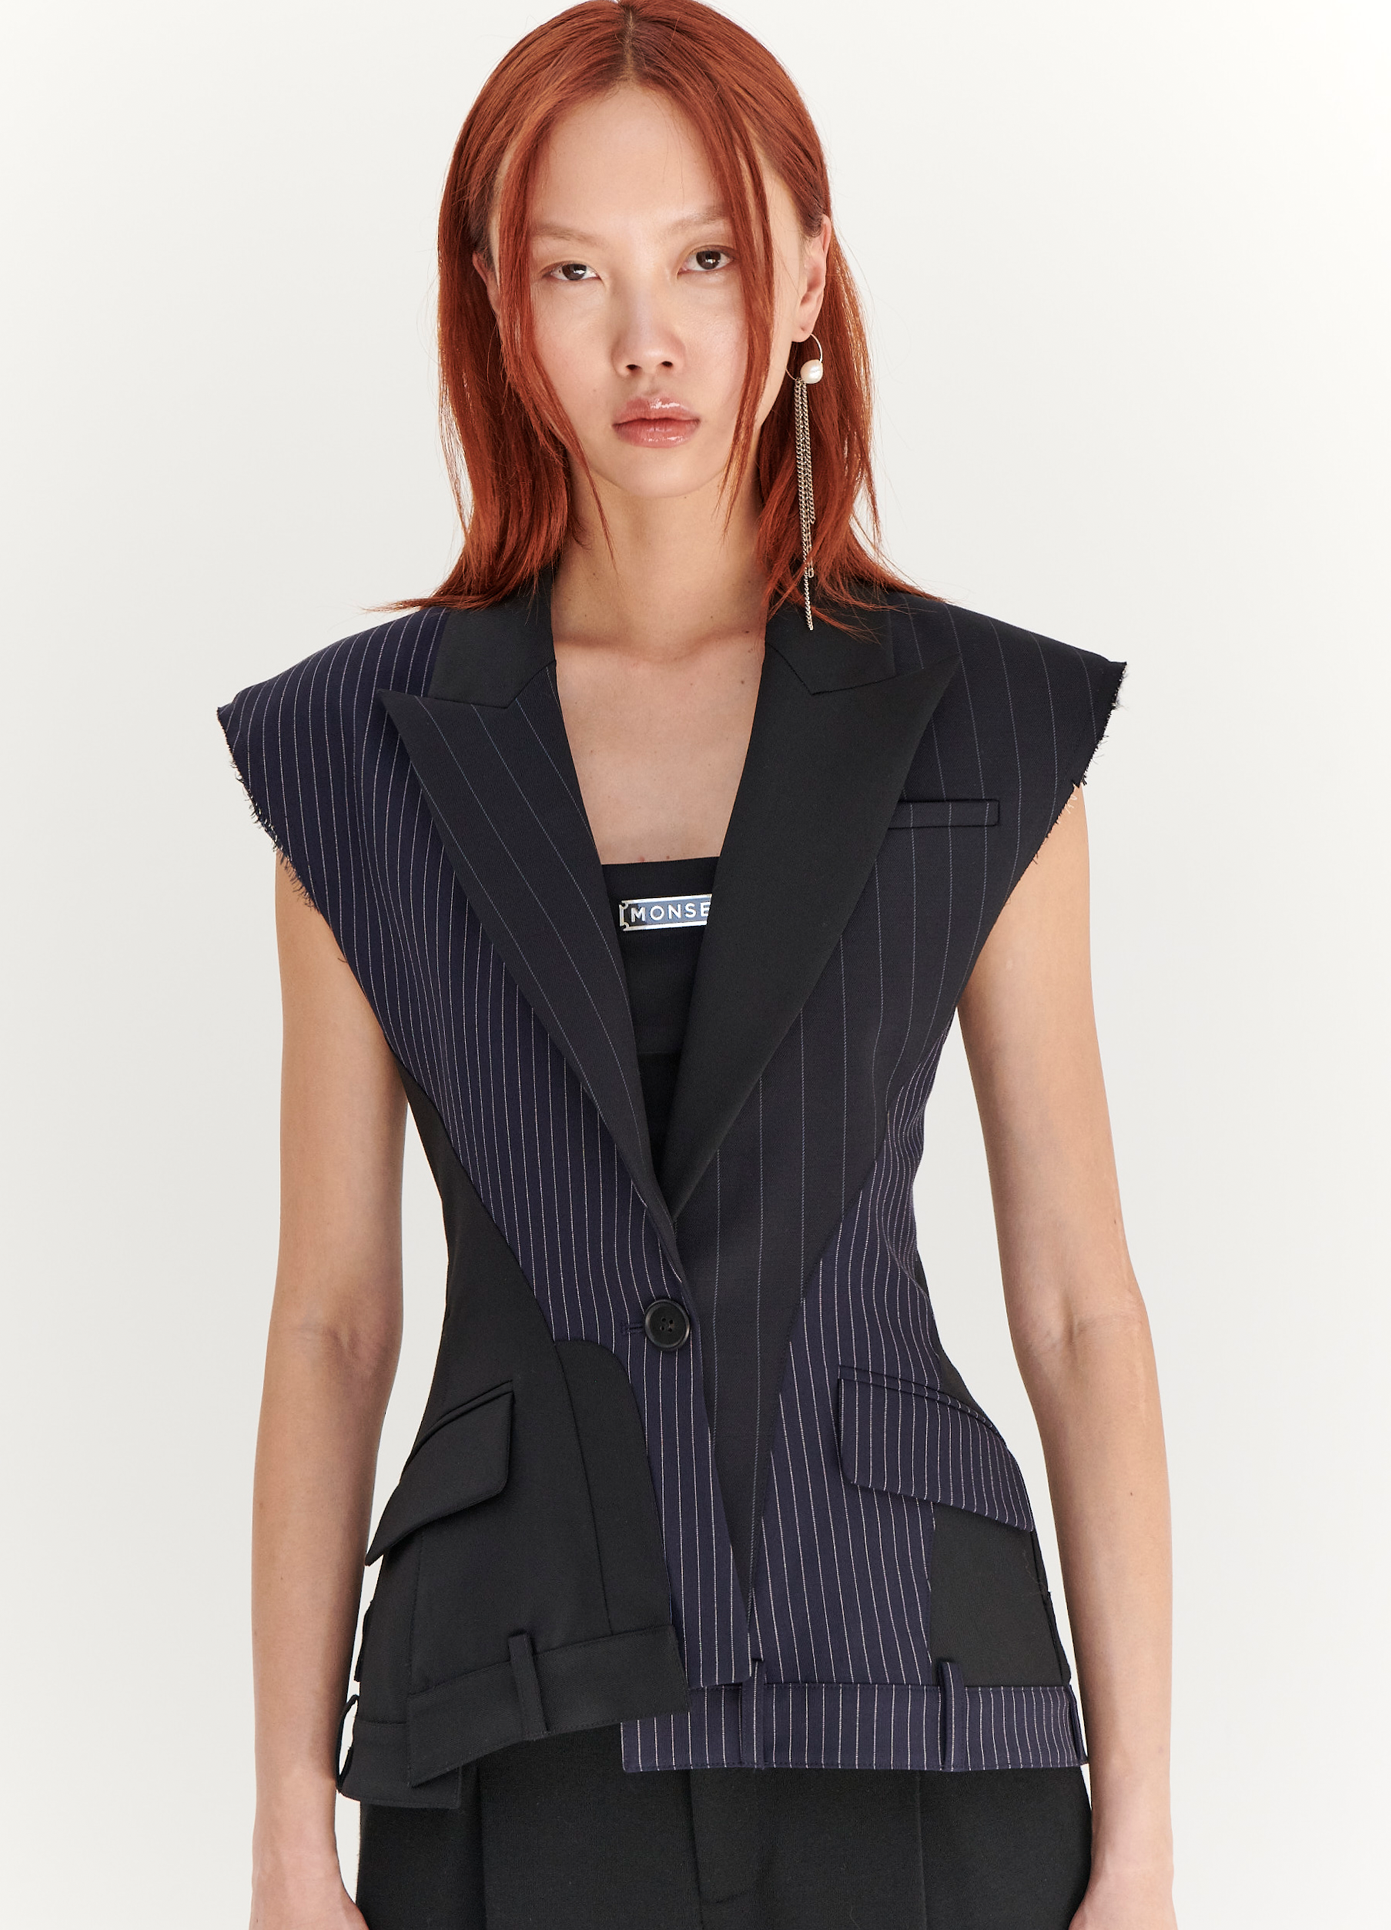 MONSE Deconstructed Sleeveless Jacket in Midnight on model front view